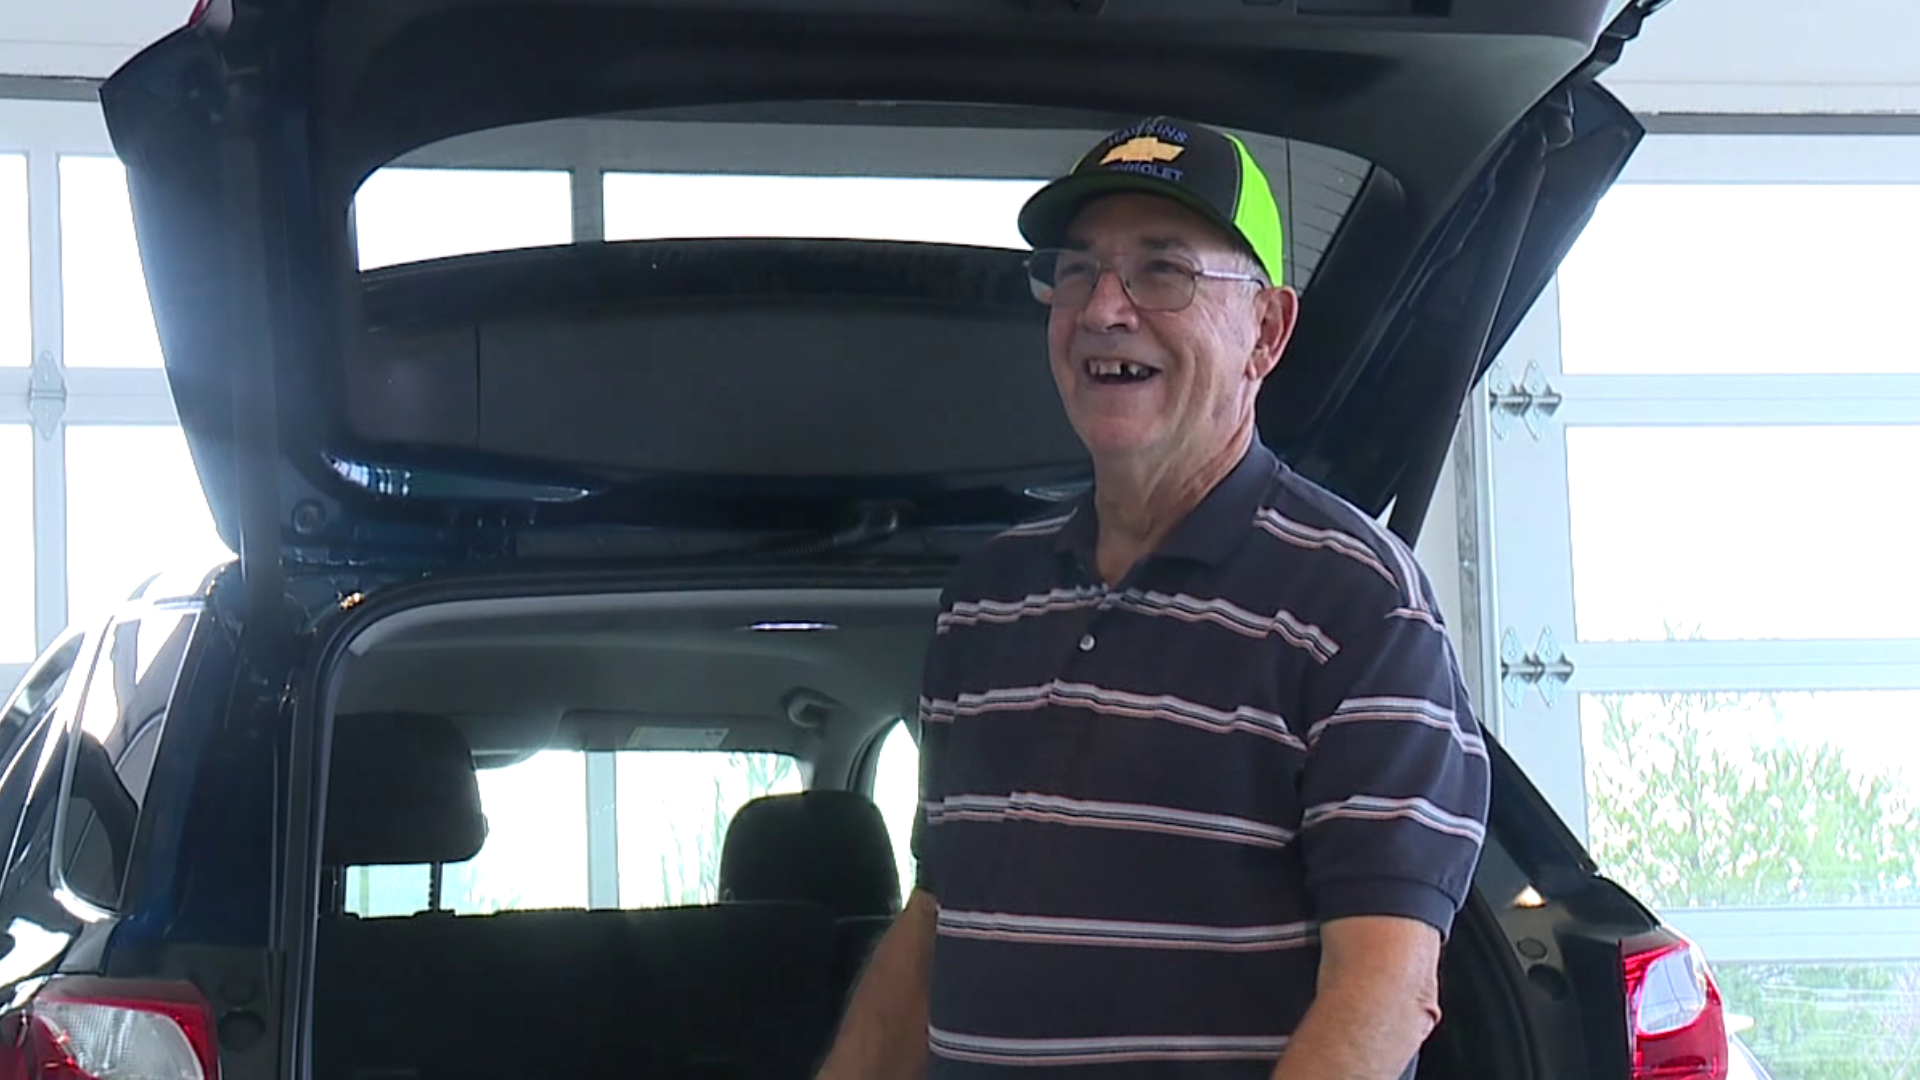 A man from Danville is the lucky winner of the Danville Area Community Center car raffle.